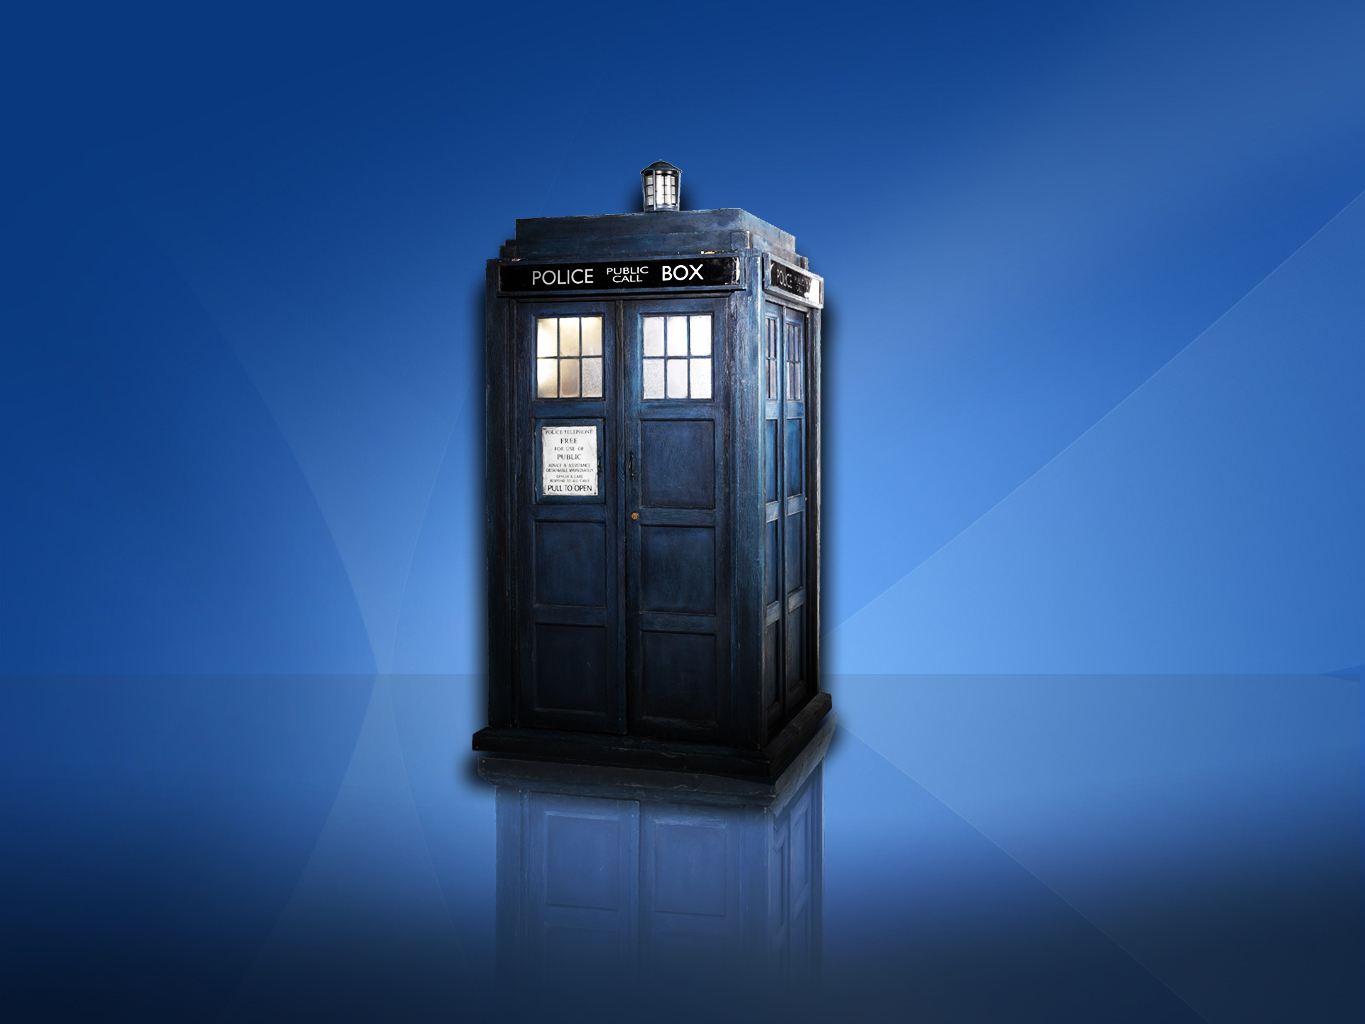 android doctor who, tv show, tardis